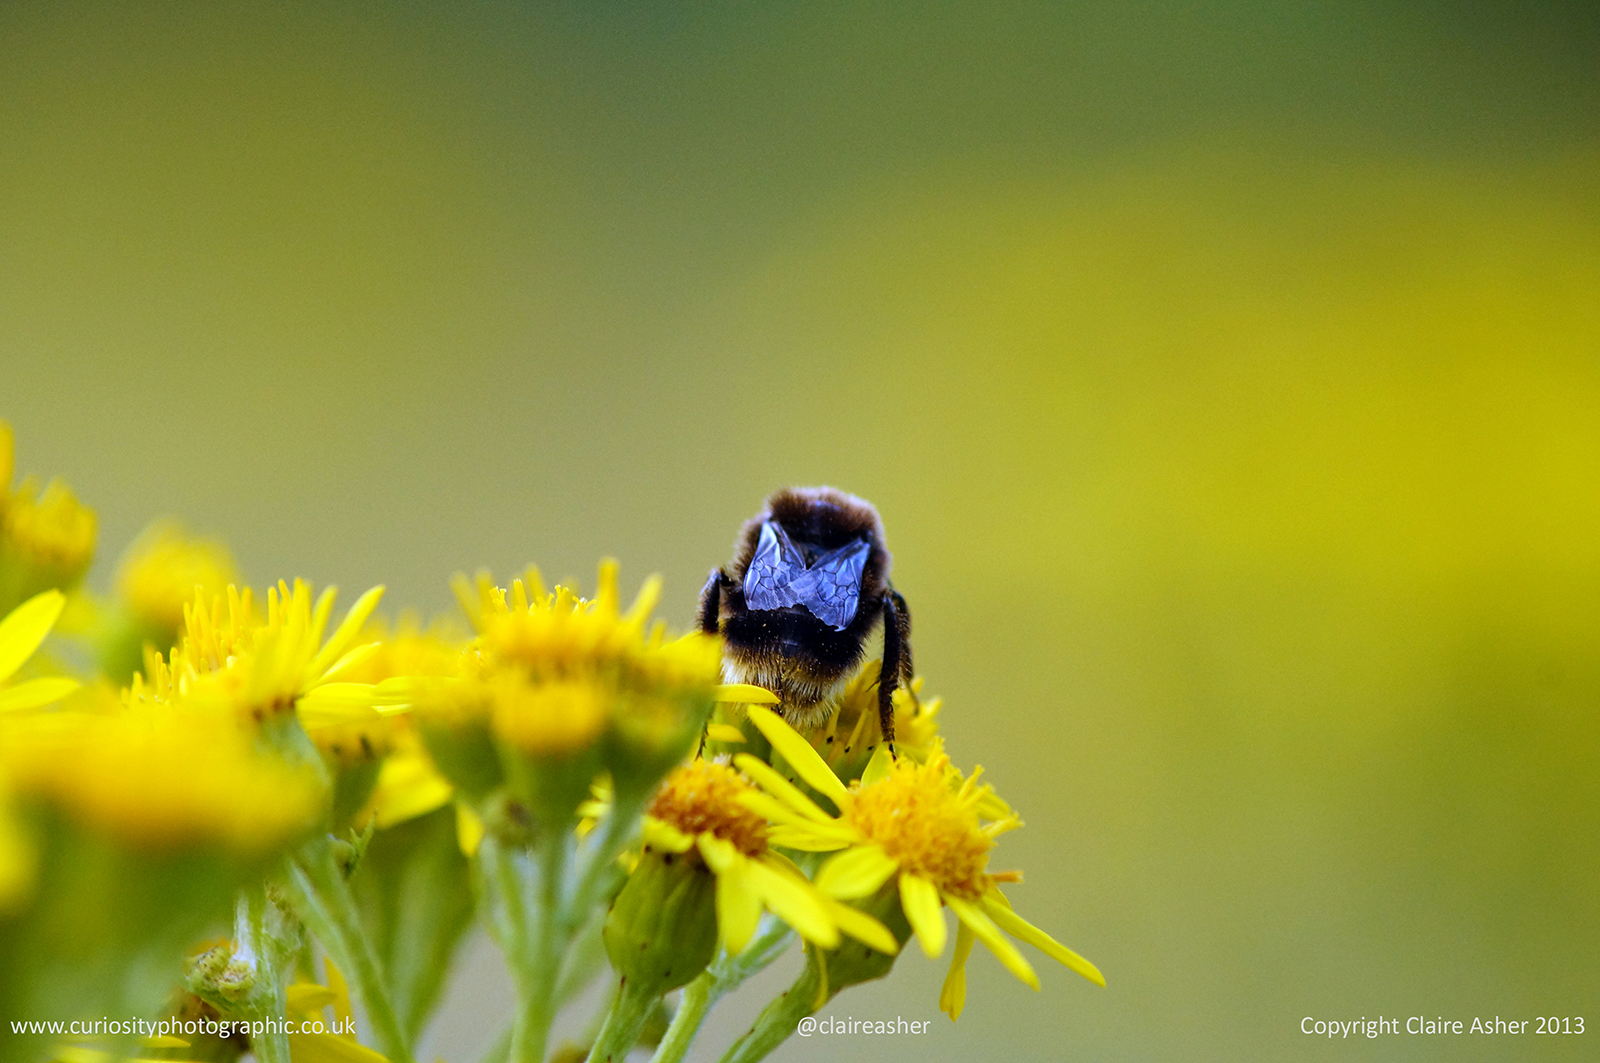 A Bumblebee (Bombus campestris) photographed in Hertfordshire, England in 2013.